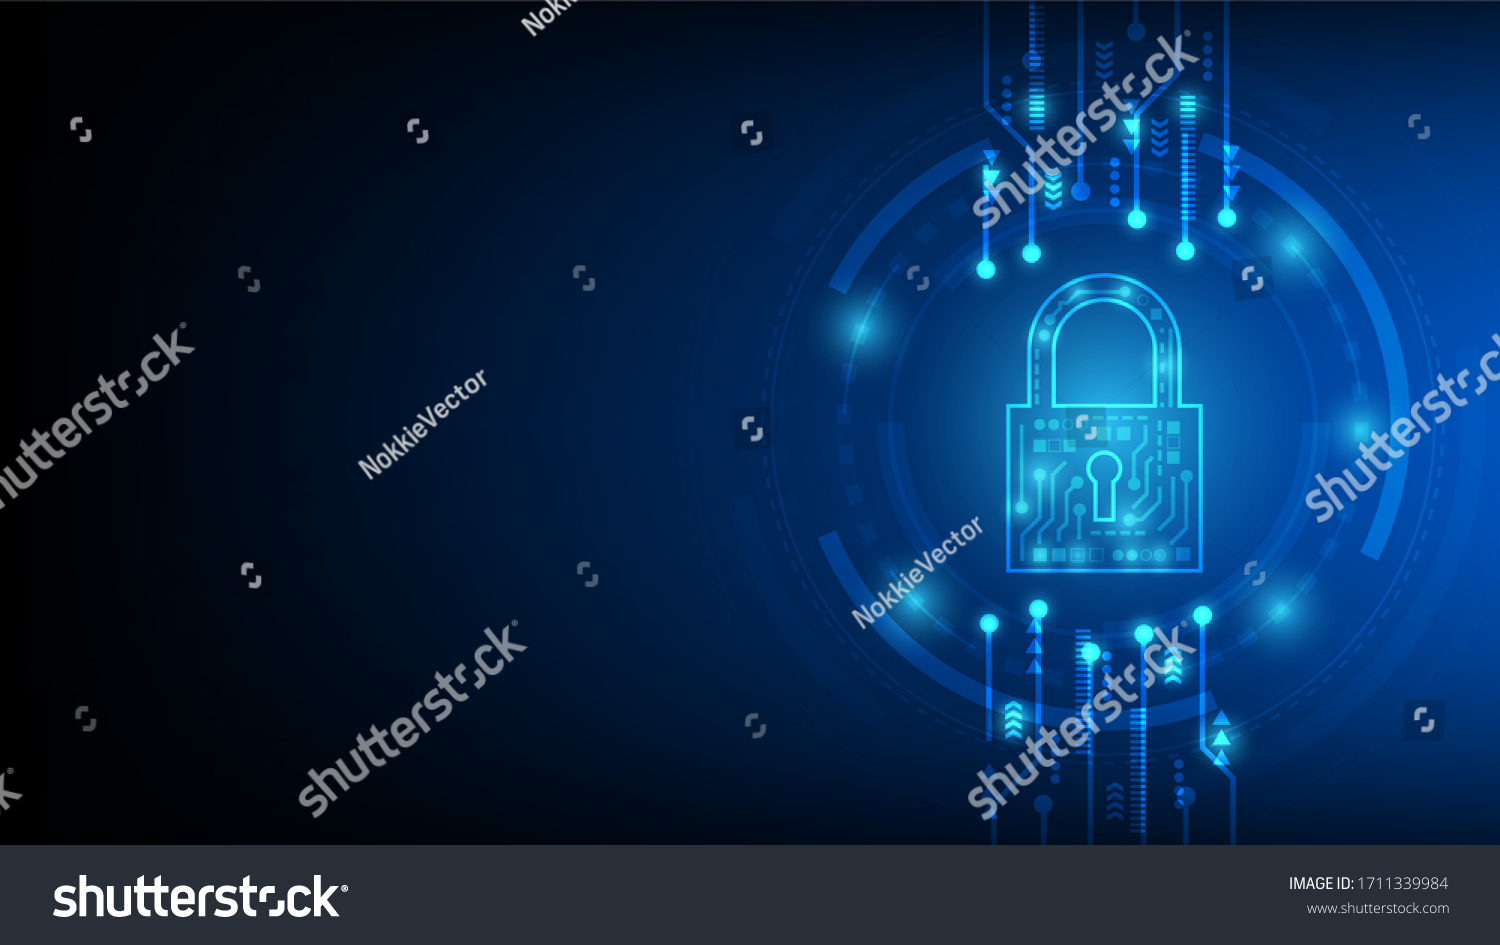 Cyber technology security, network protection background design, vector illustration #1711339984